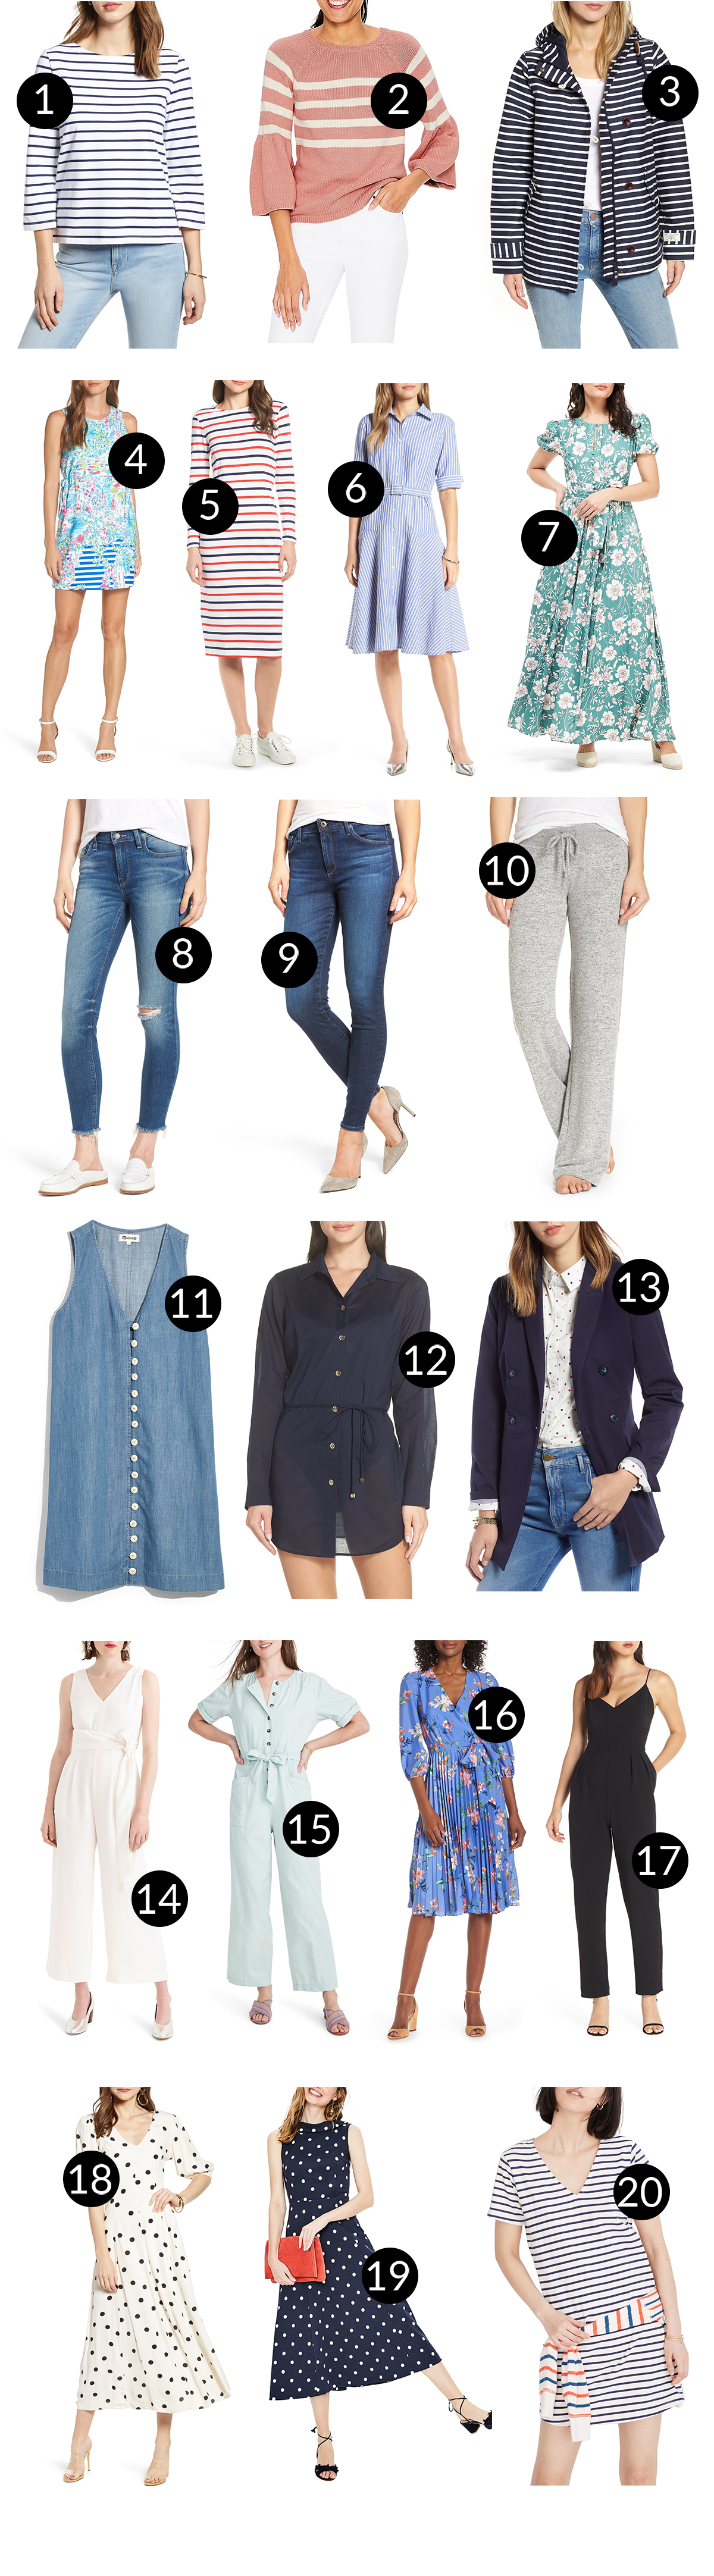 Nordstrom Clothing (Half-Yearly Sale): Insane deals. SO. MANY. MARKDOWNS.